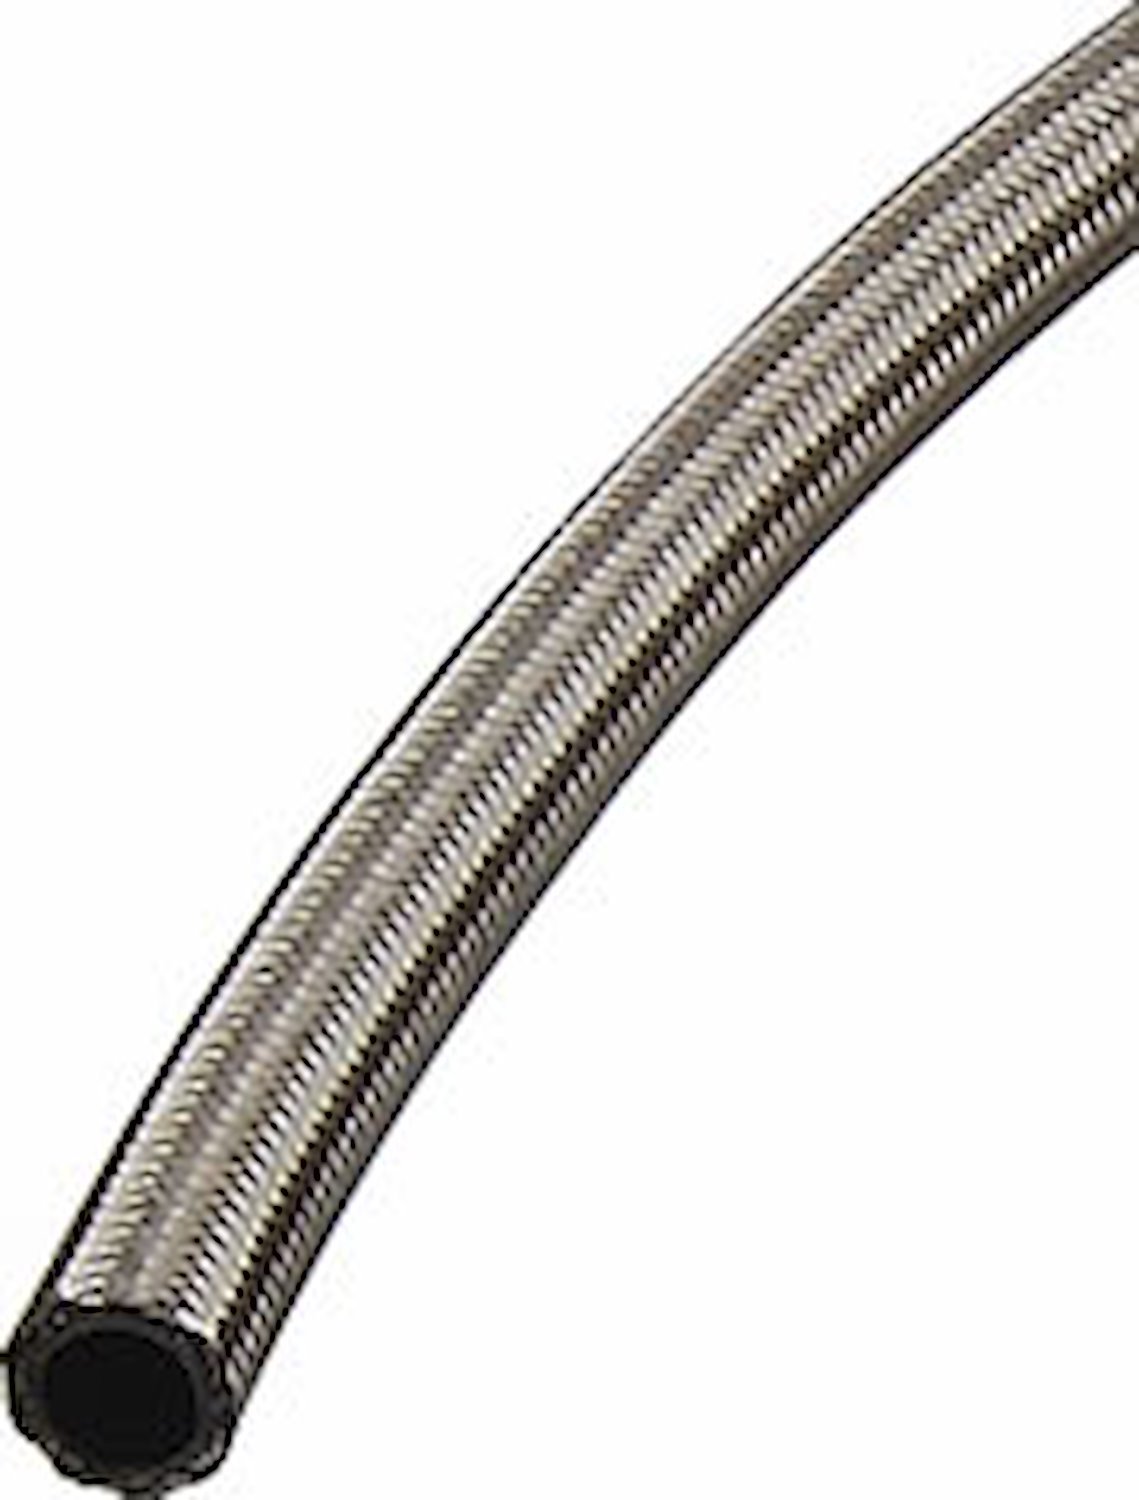 Pro-Flo 200 Series Stainless Steel Braided Hose -10